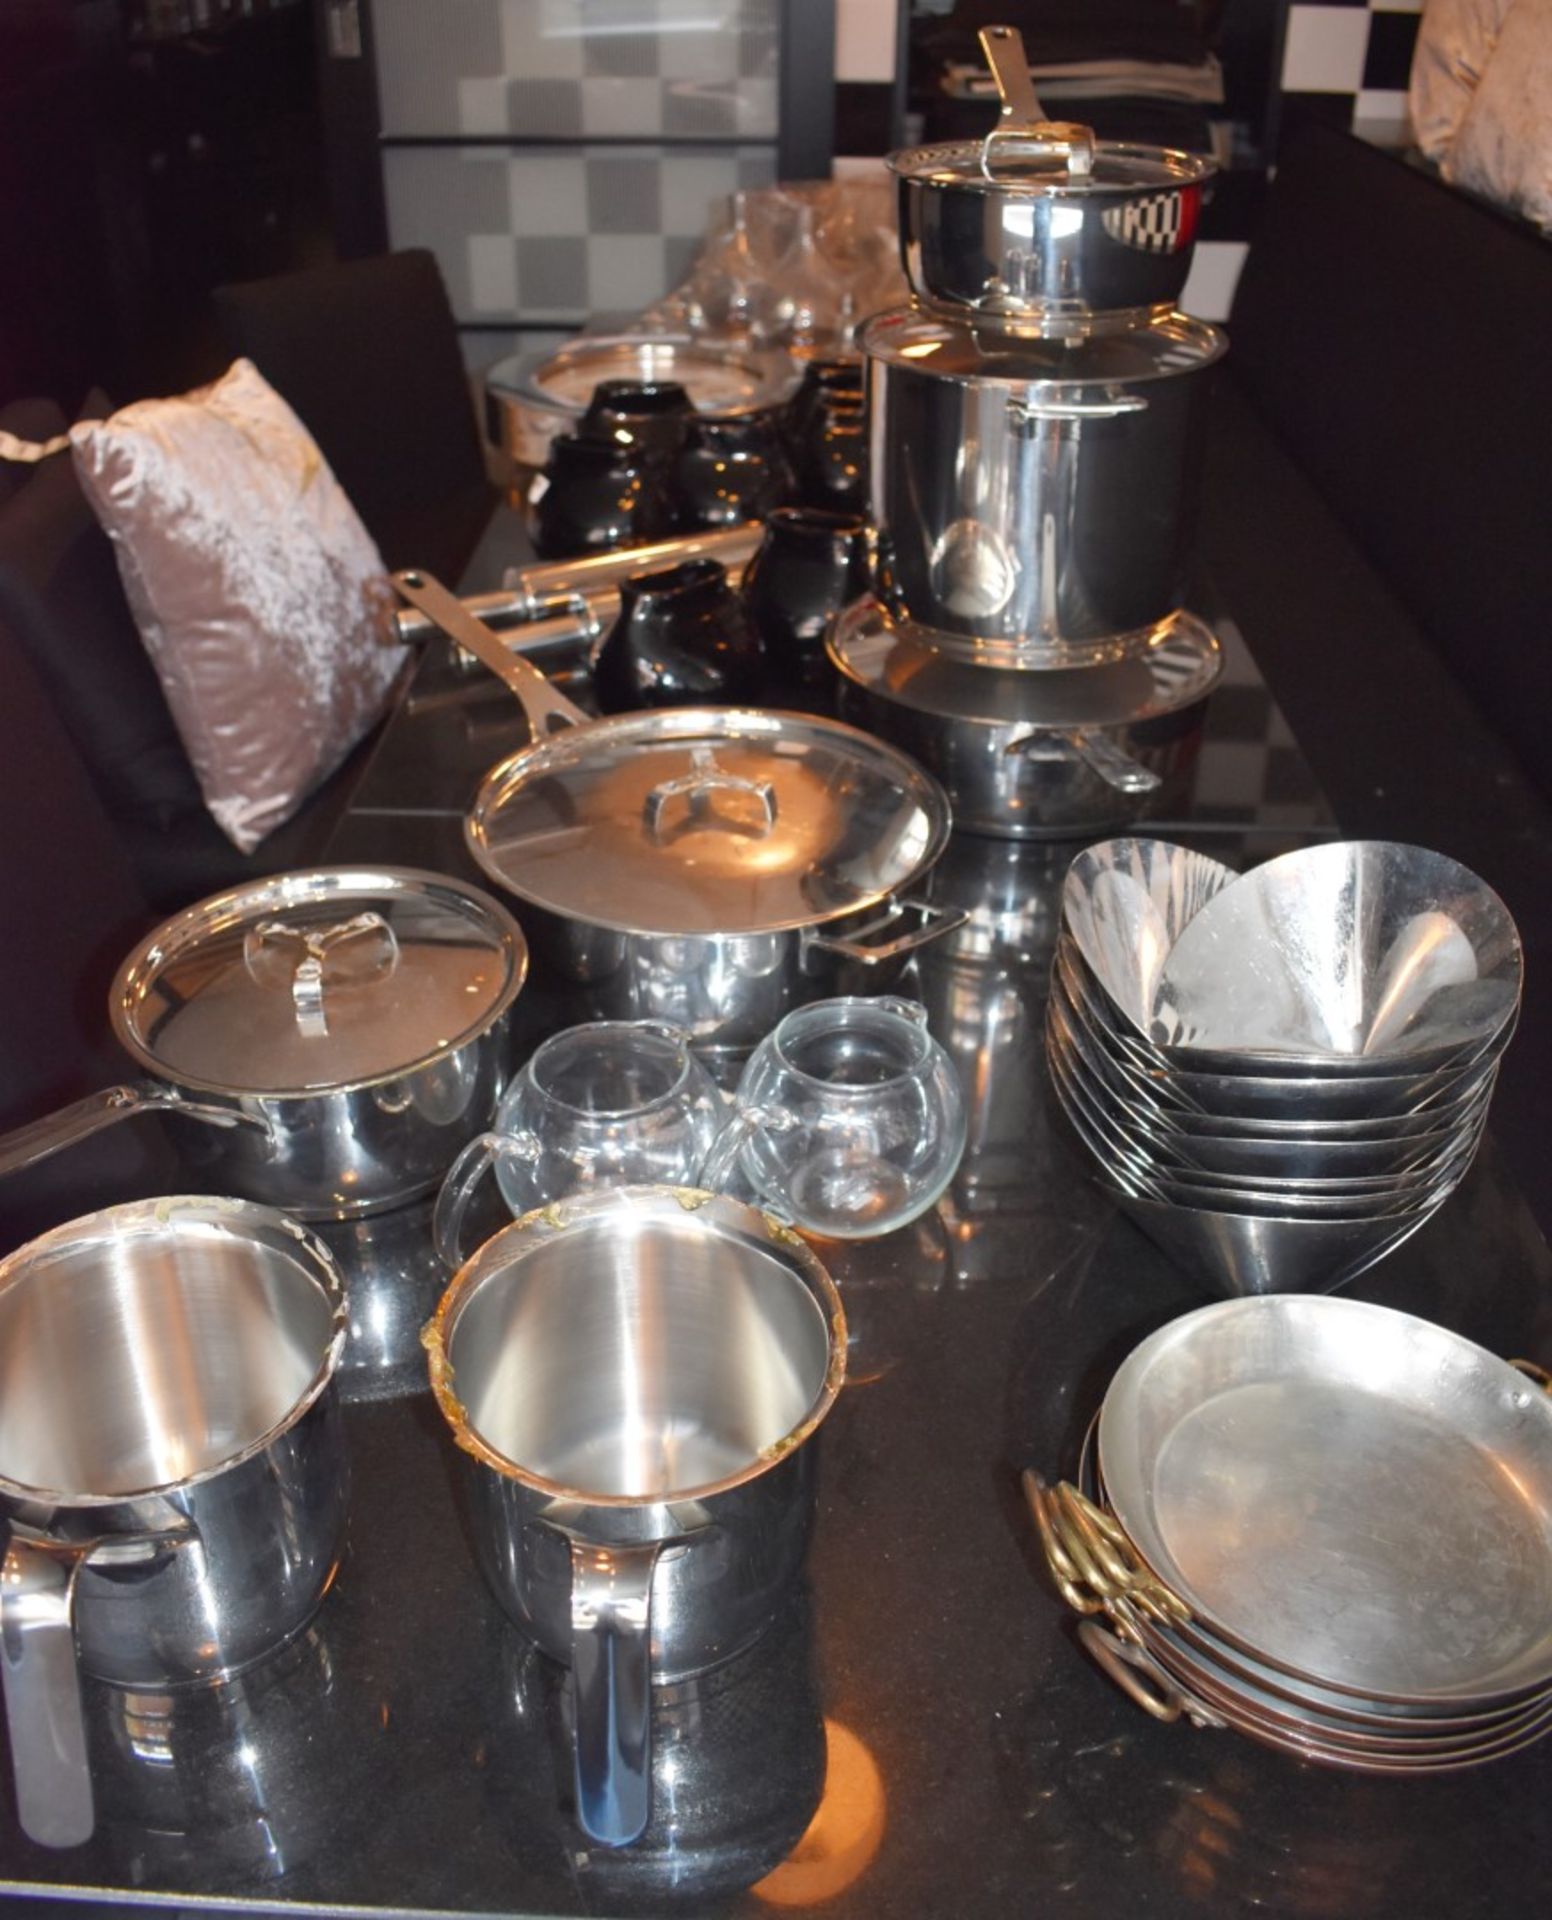 Approx 41 x Items of Kitchen and Tableware - Includes Stainless Steel Rolling Pins, Wall Clock, - Image 17 of 17